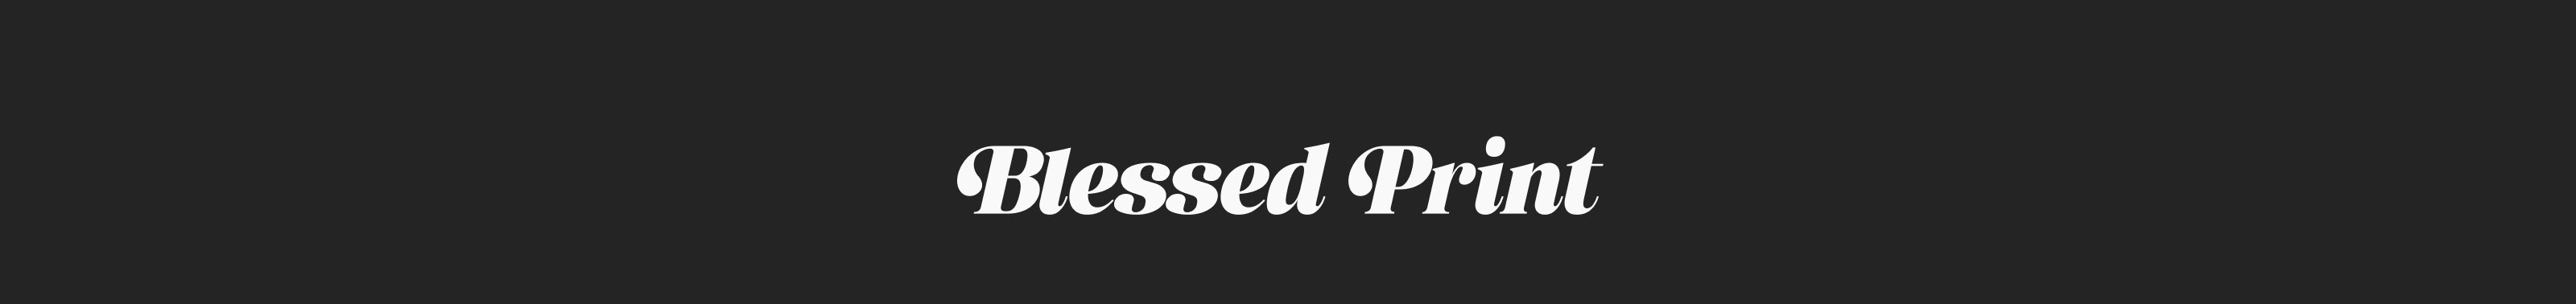 Blessed Print®'s profile banner